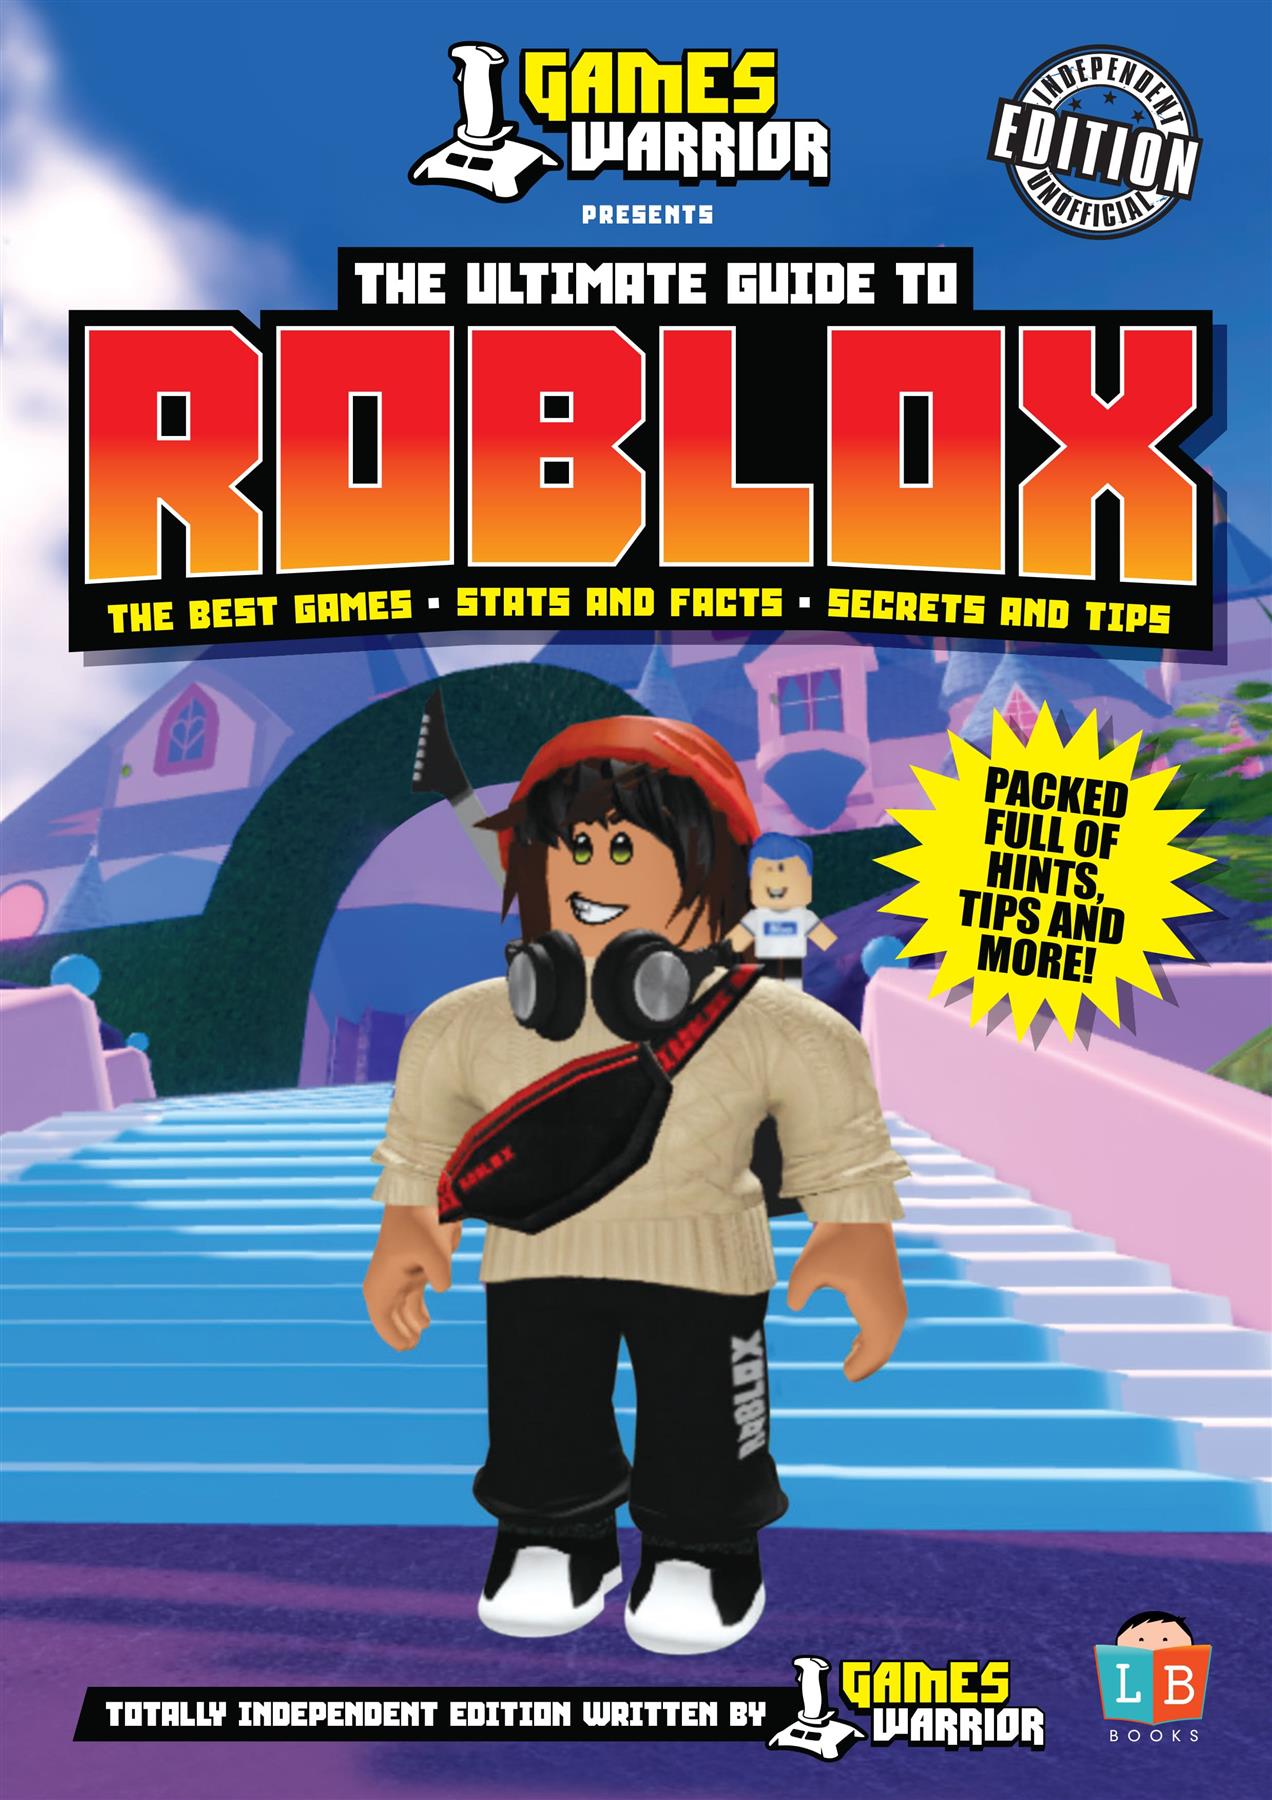 Roblox The Ultimate Guide by Games Warrior